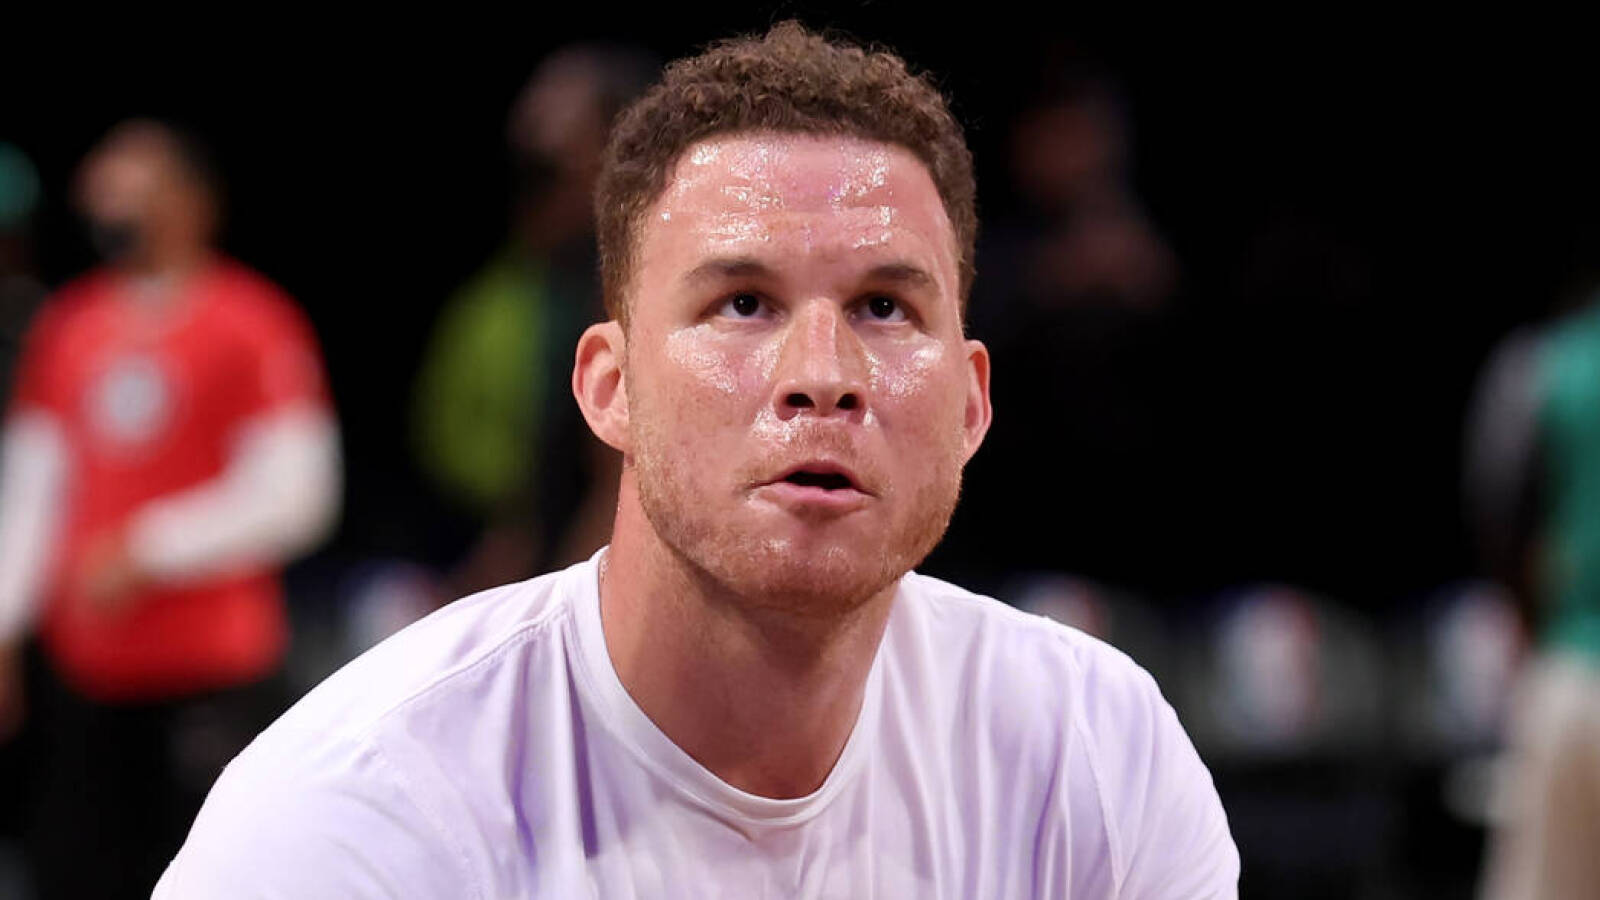 Celtics sign Blake Griffin to one-year contract